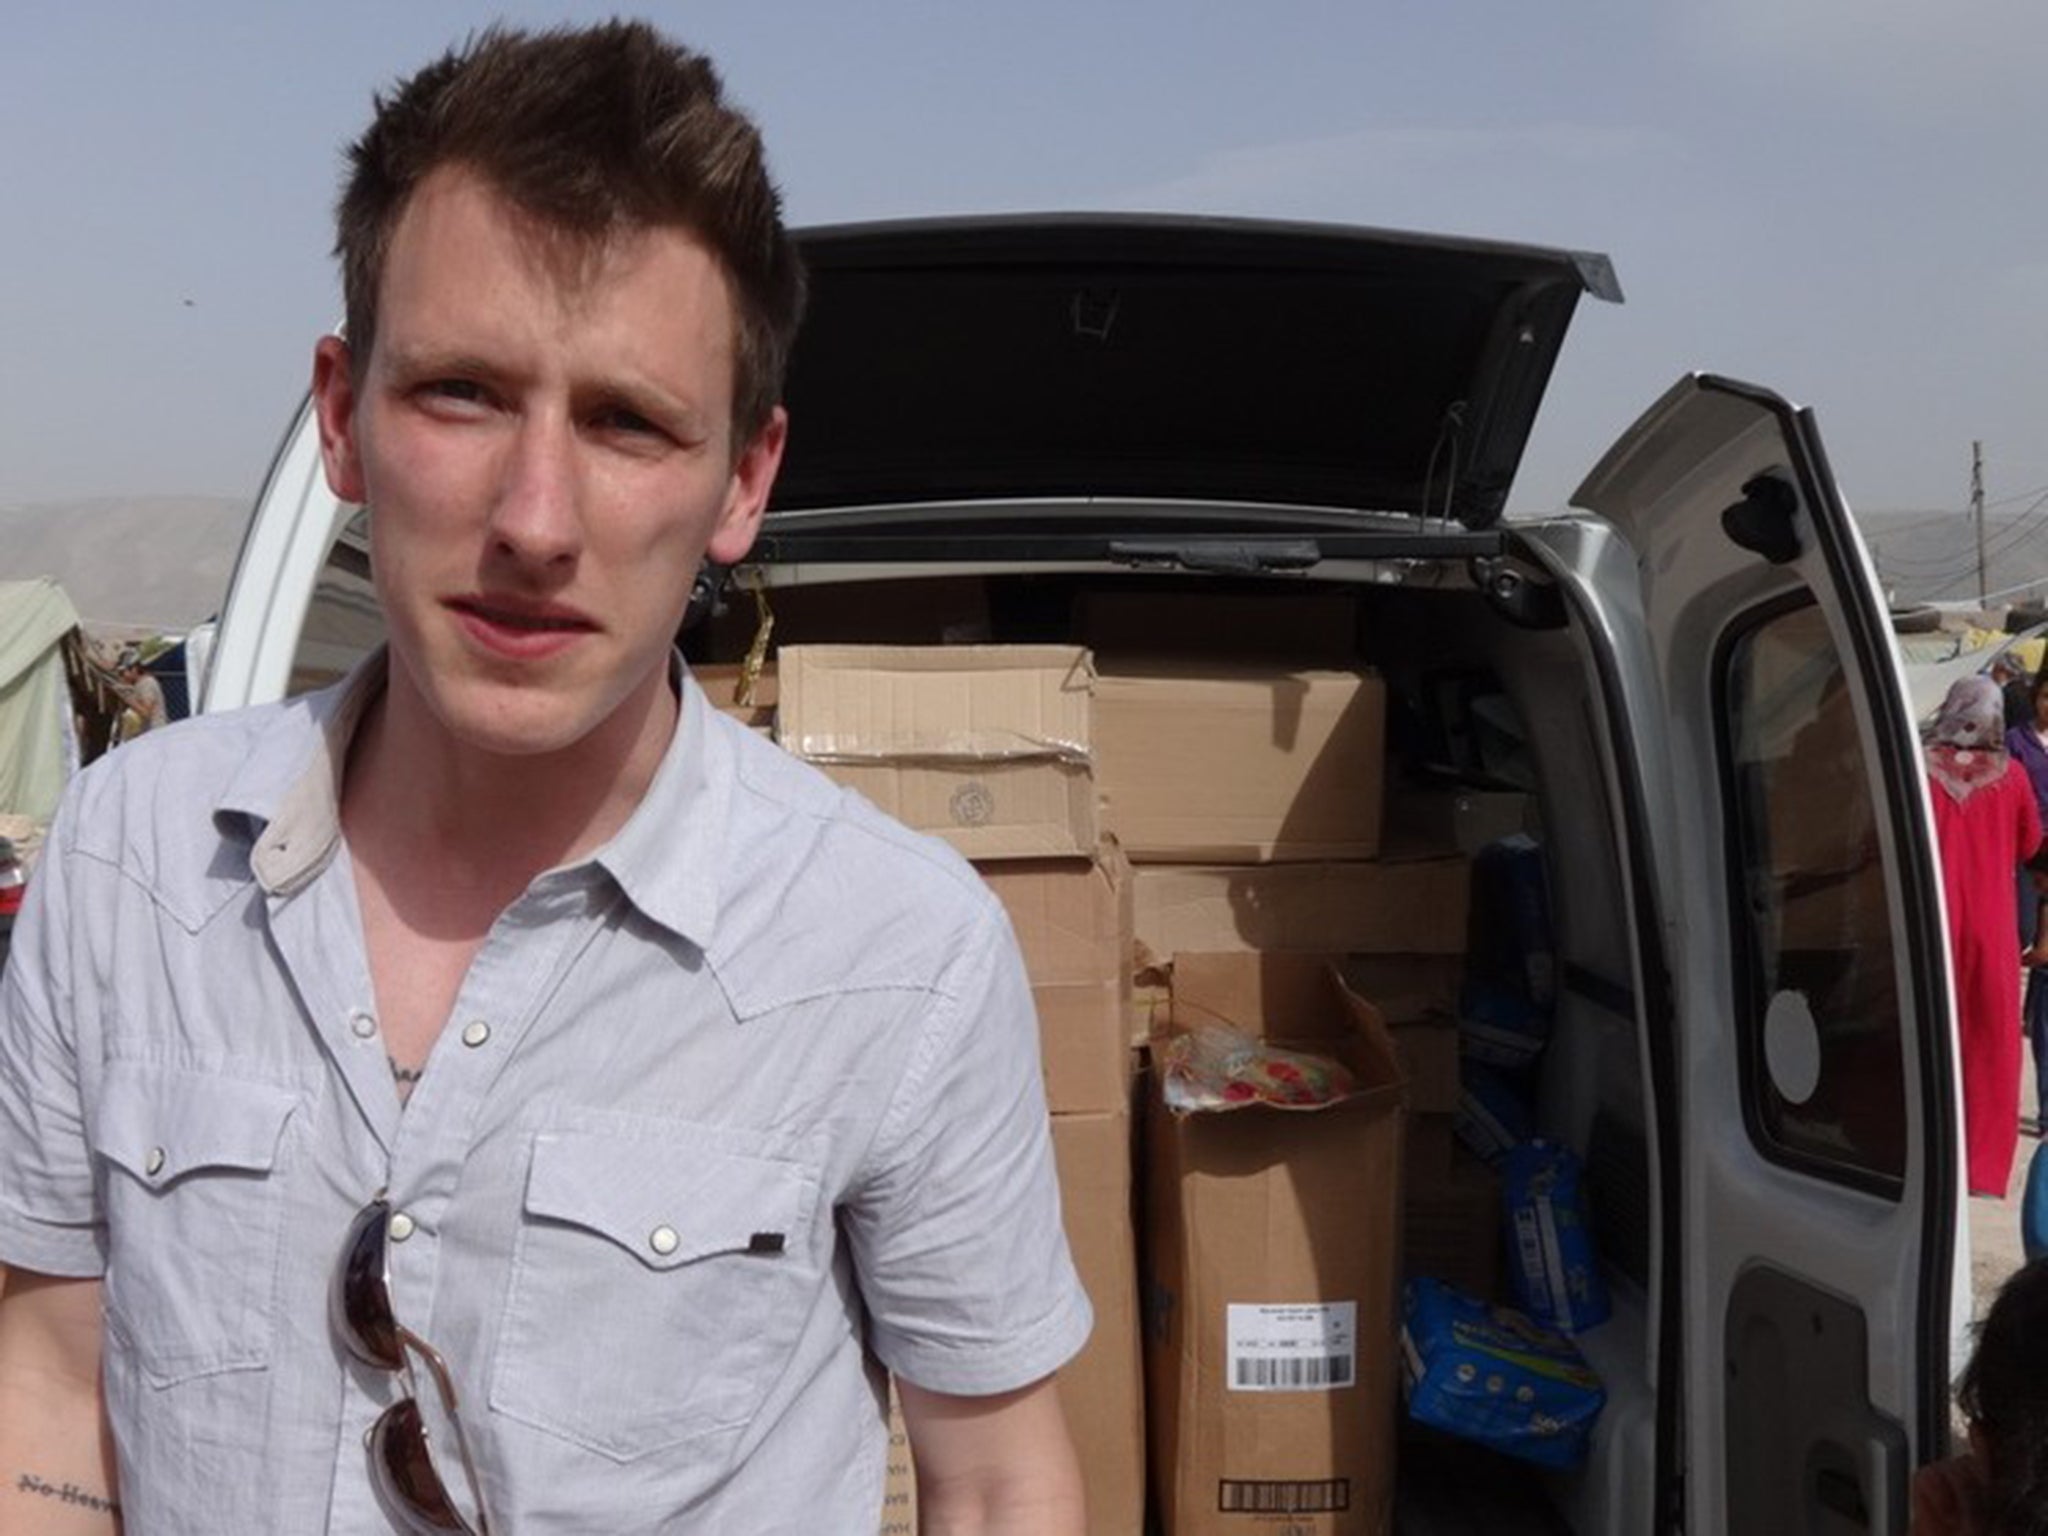 Peter Kassig, also known as Abdul-Rahman, was kidnapped last year while carrying out aid work in eastern Syria